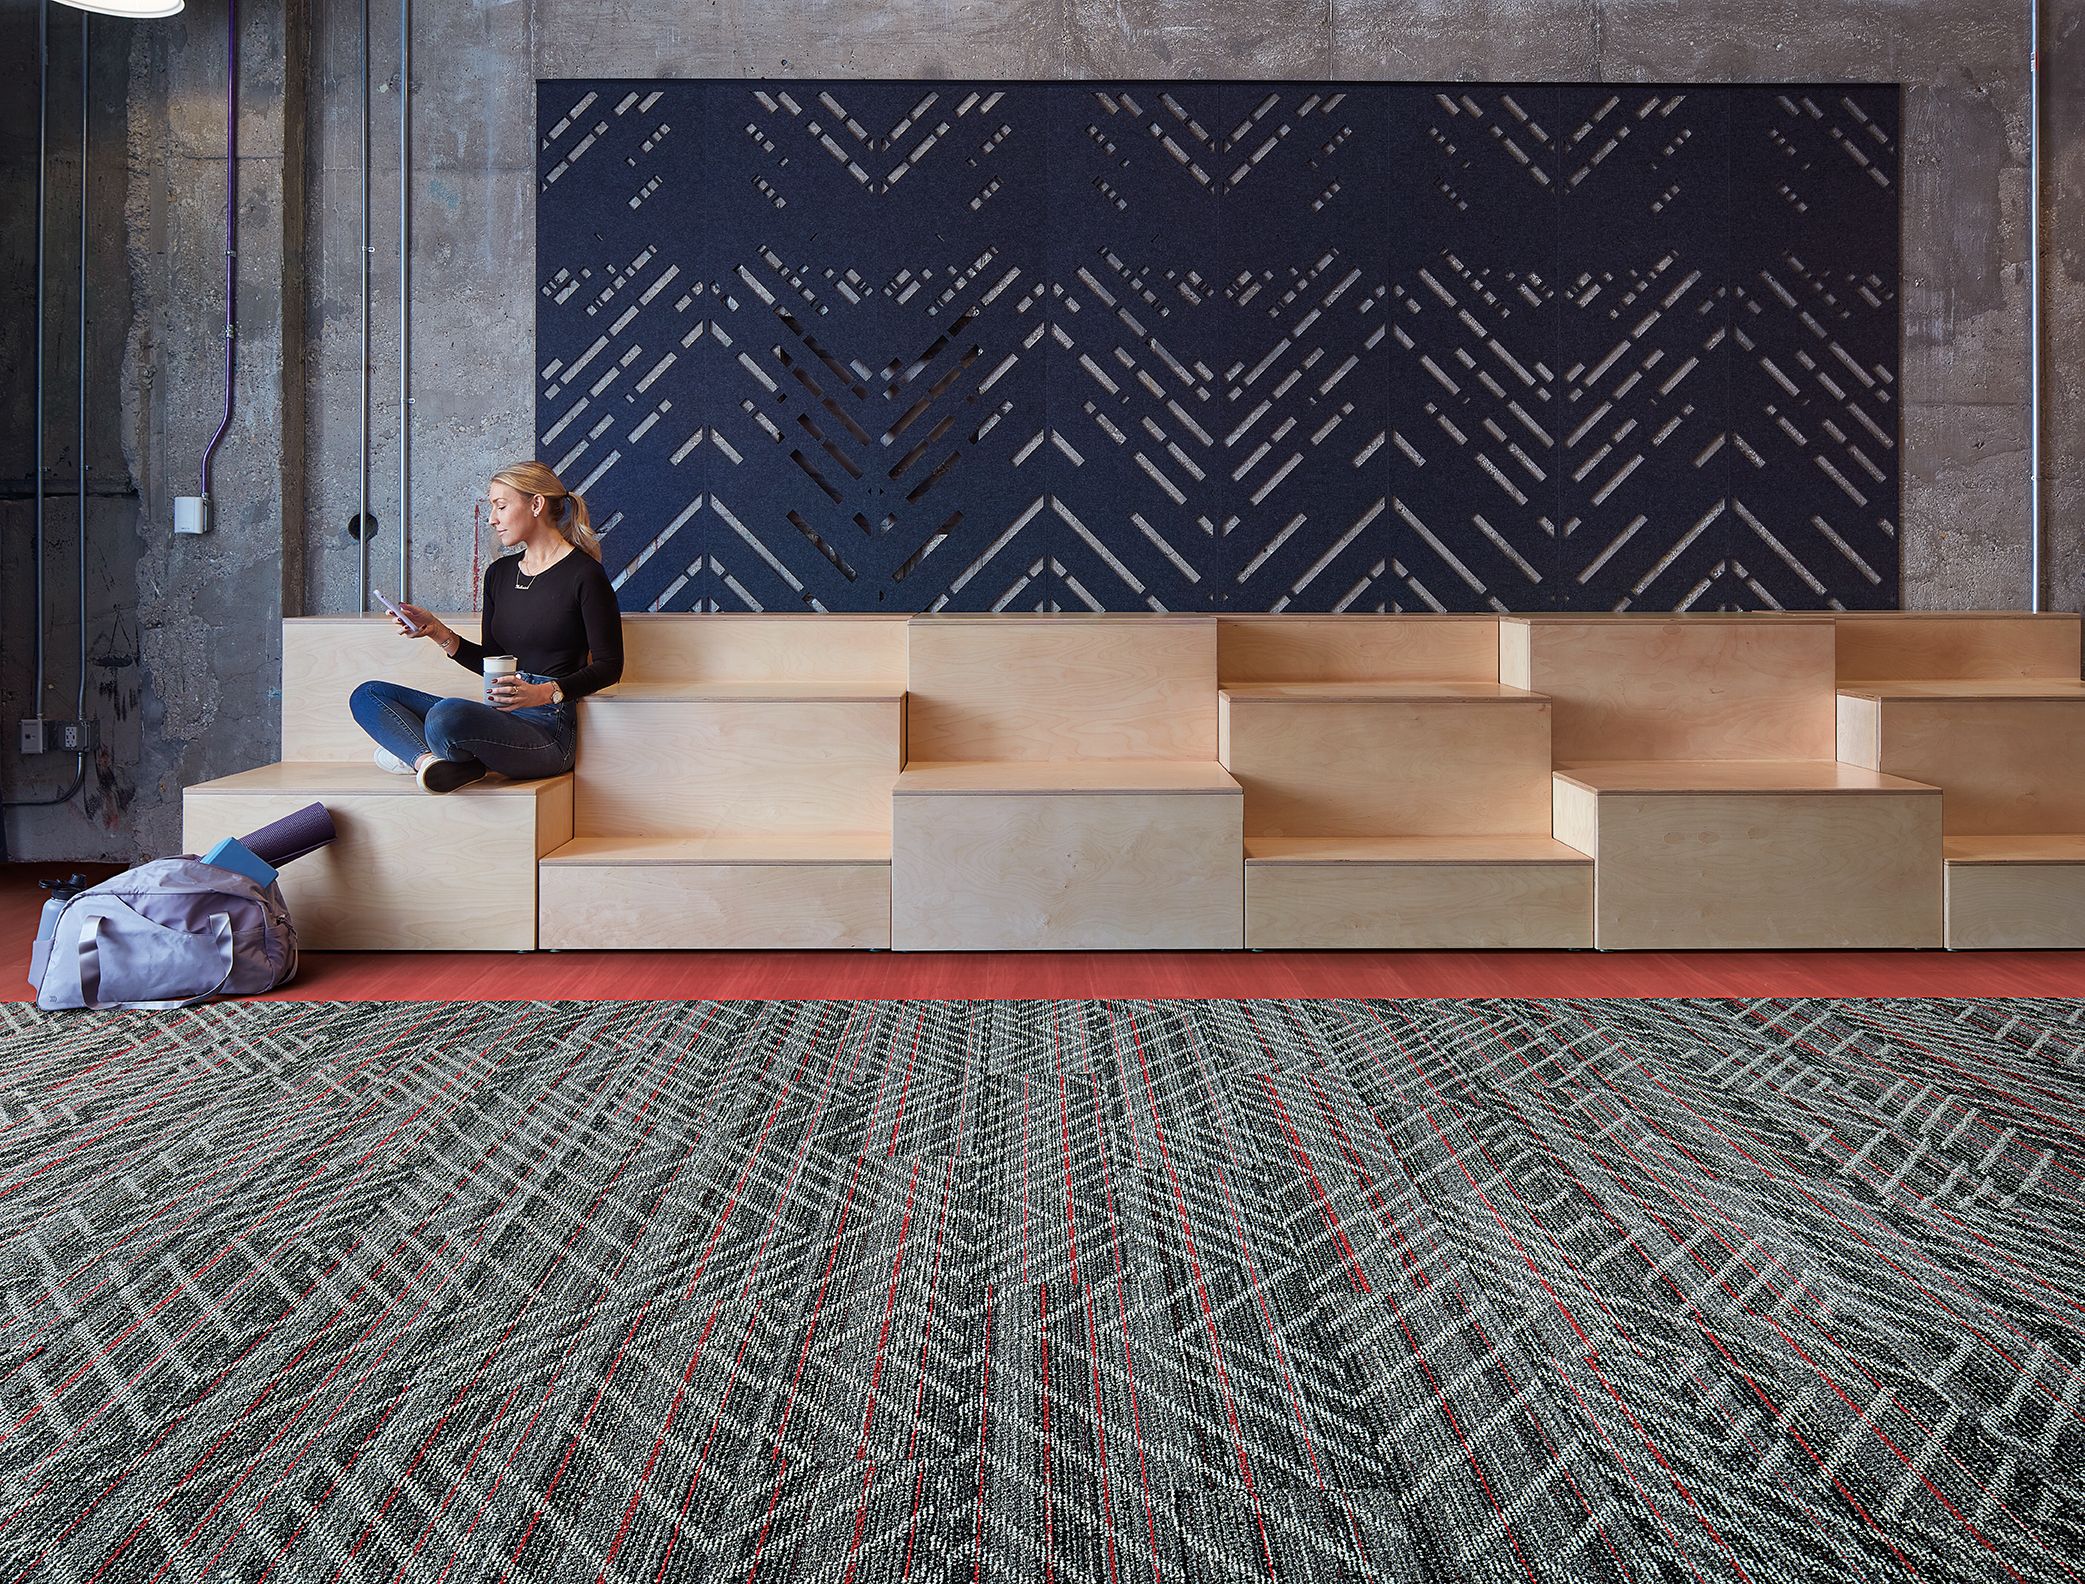 Interface Reflectors plank carpet tile with Studio Set LVT in open area with woman seated on wood risers image number 2